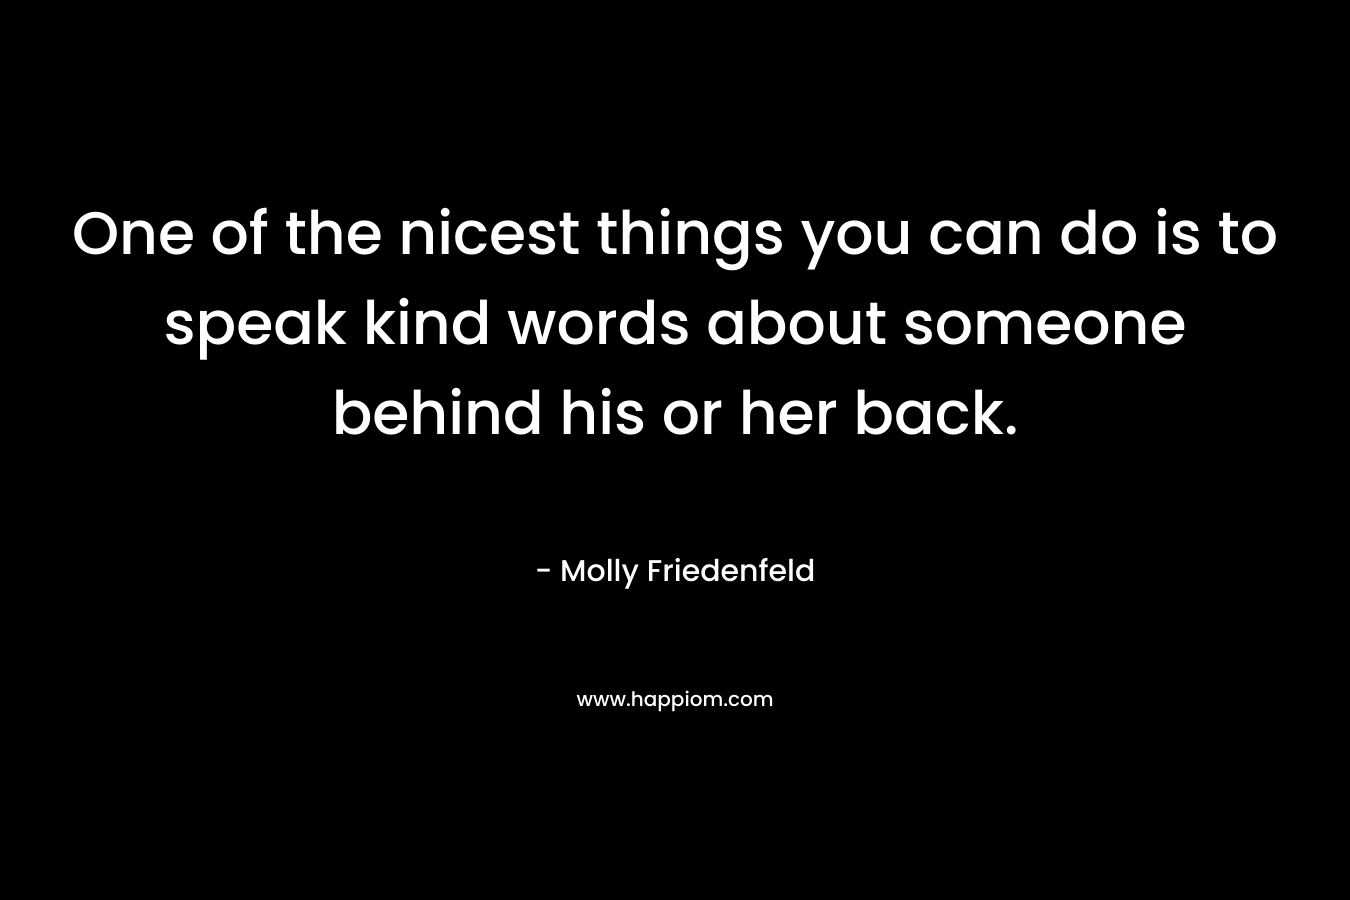 One of the nicest things you can do is to speak kind words about someone behind his or her back.